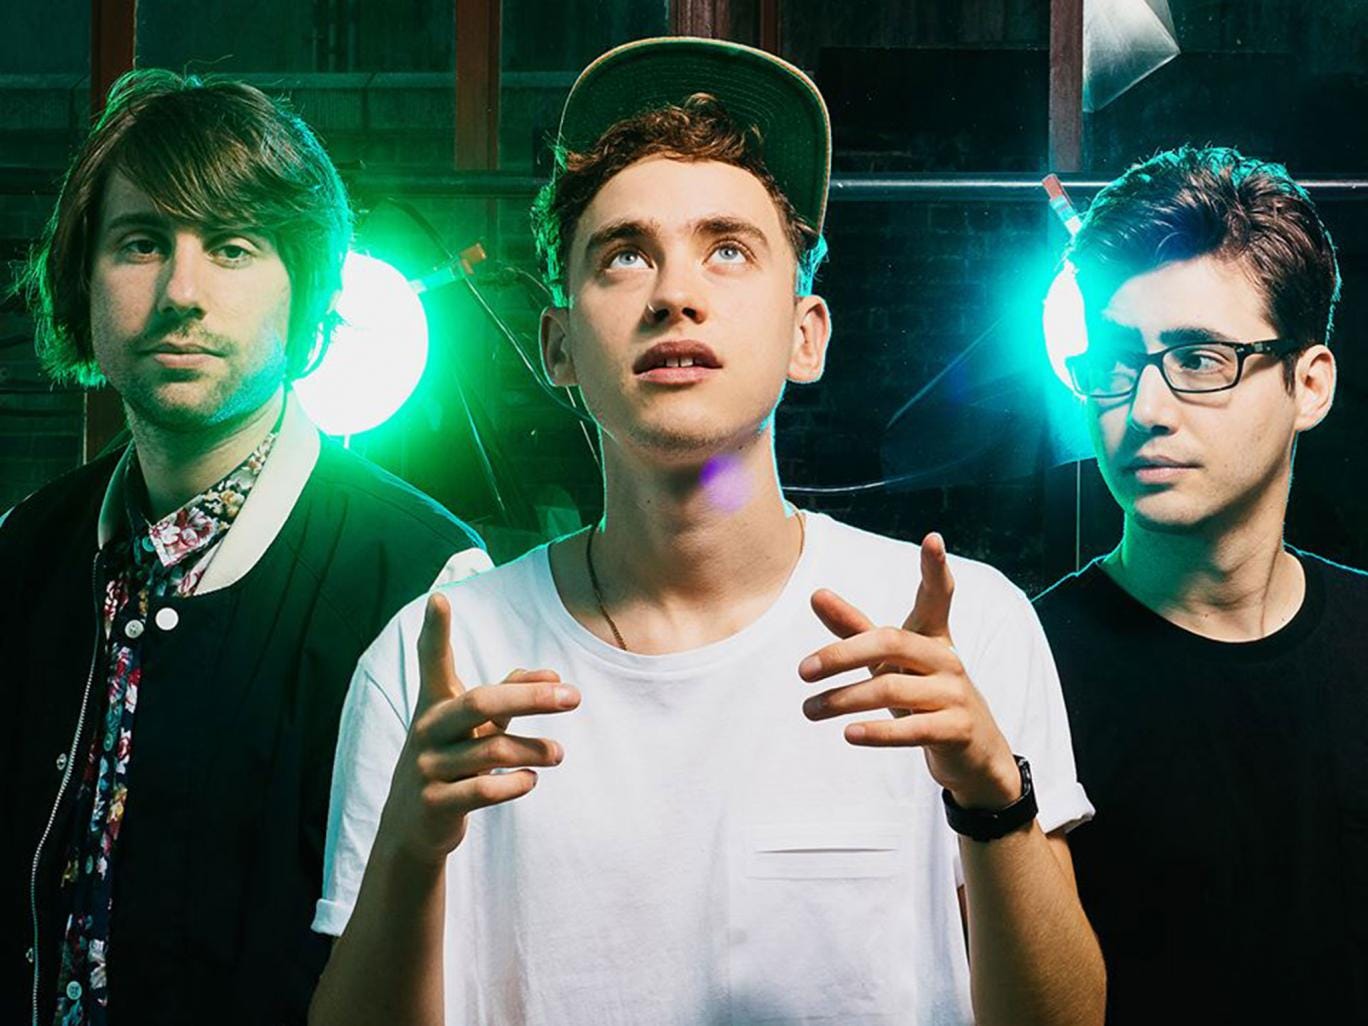 BBC Sound of 2015: Years & Years top poll pr